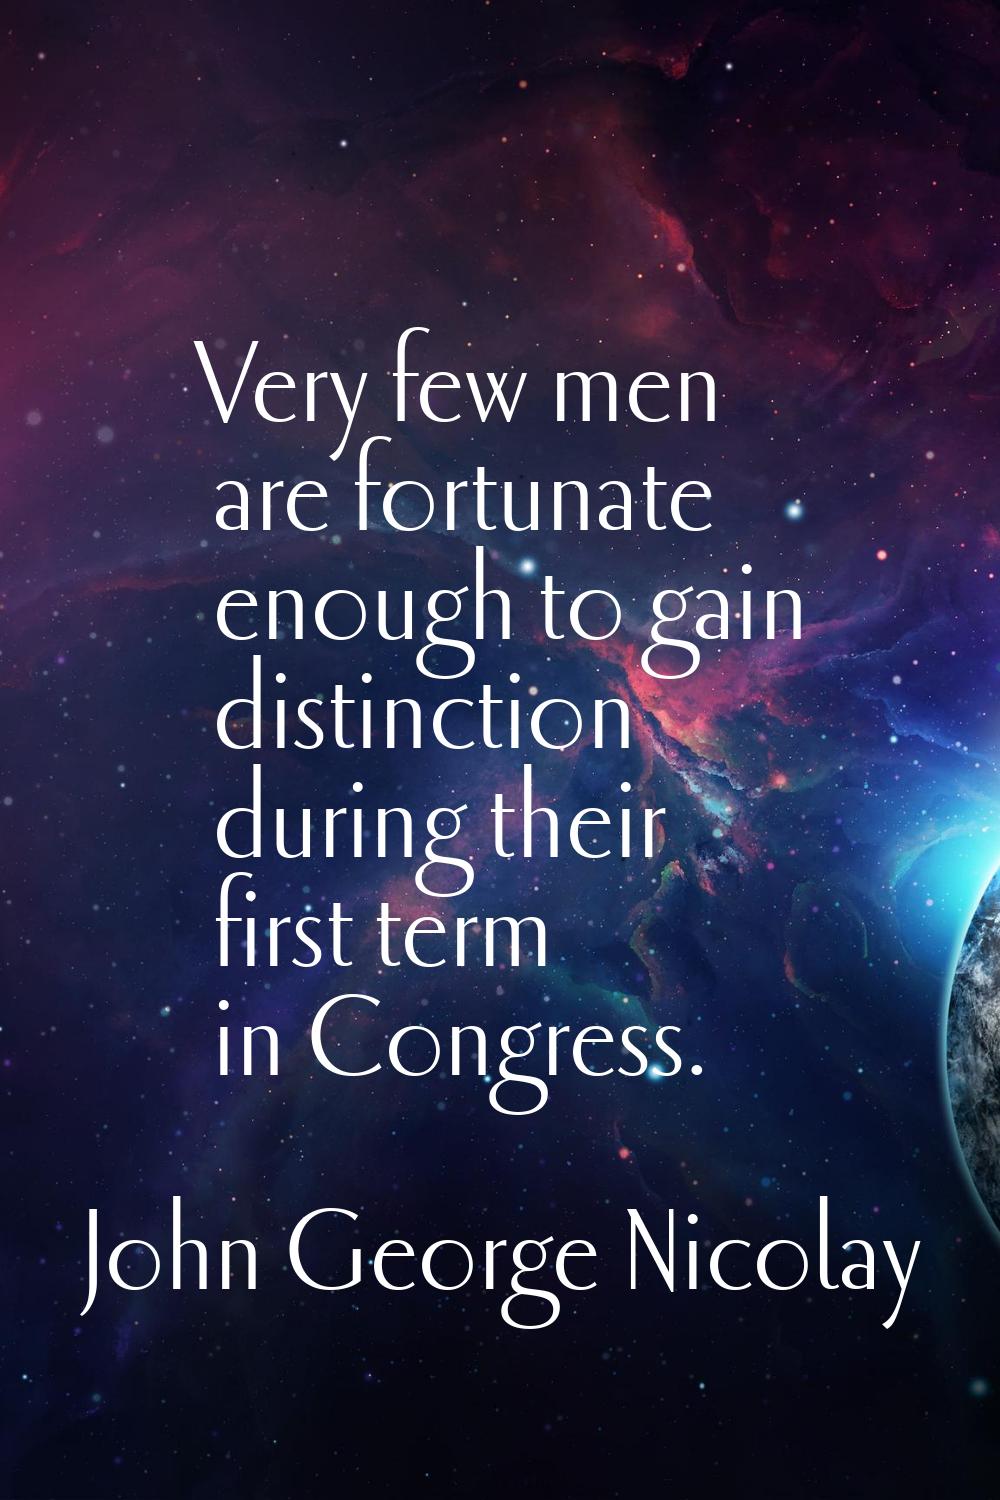 Very few men are fortunate enough to gain distinction during their first term in Congress.